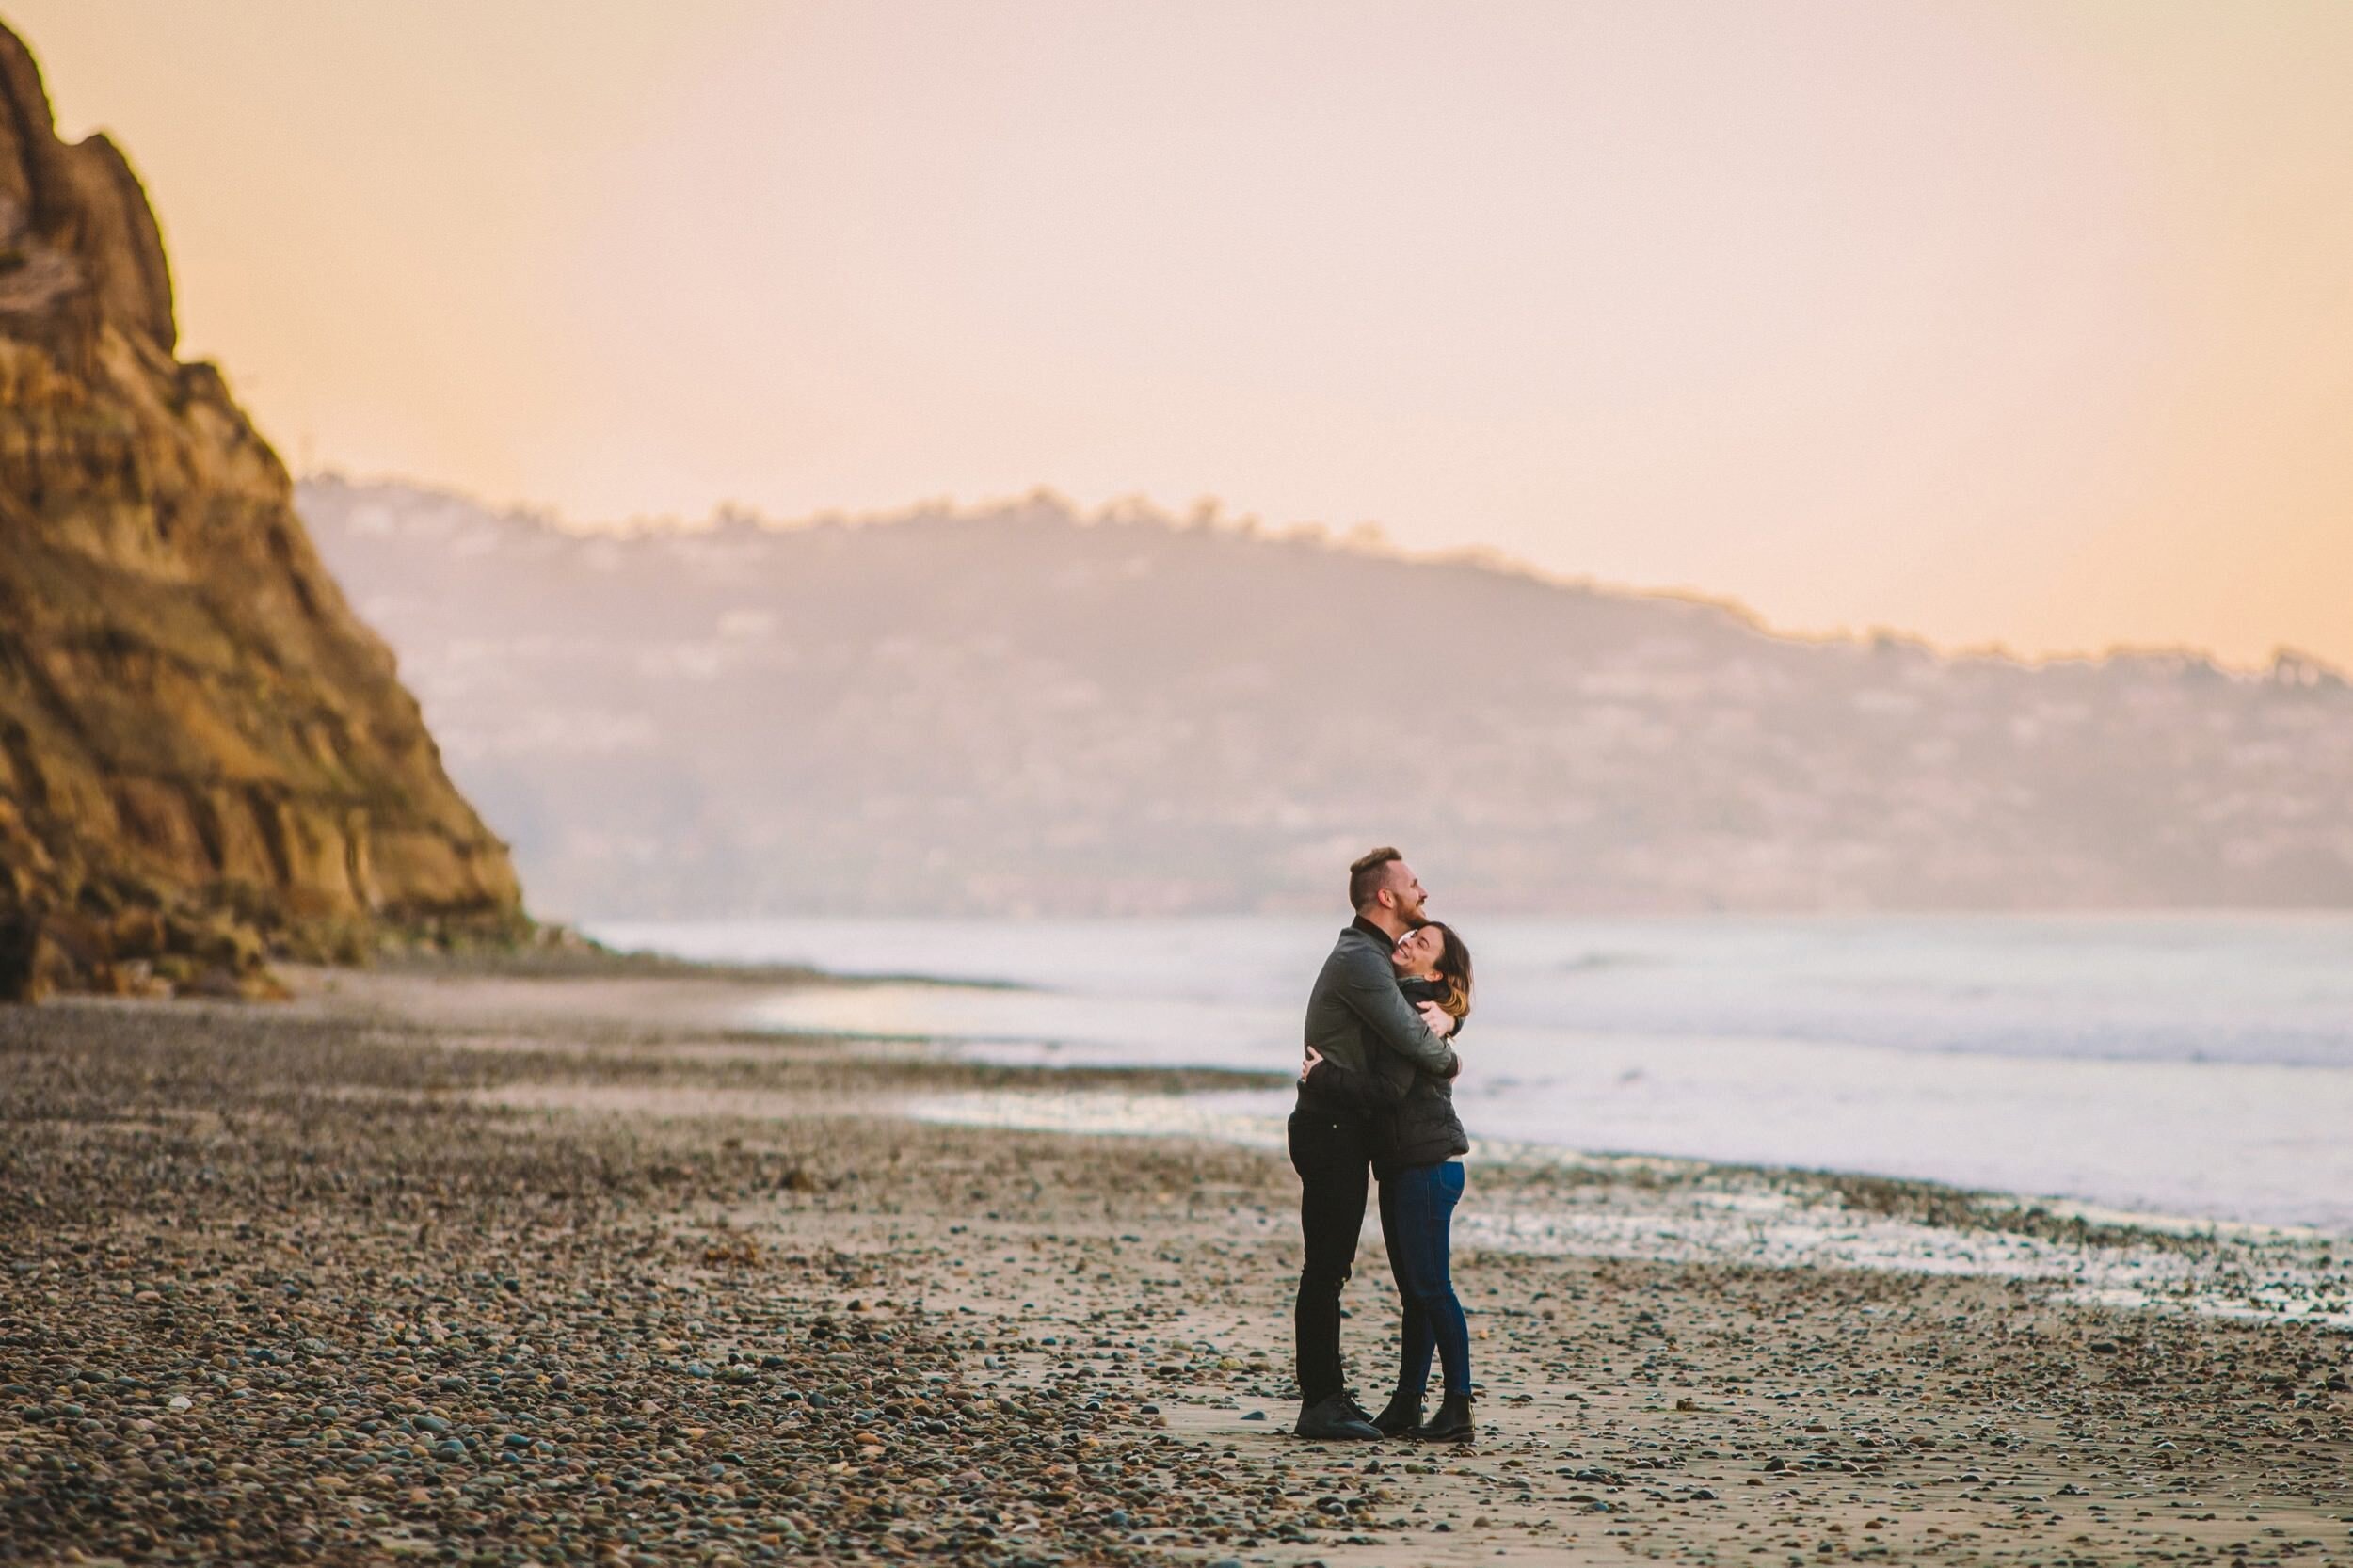 Suprise Proposal & Engagement Photography at Torrey Pines at Sunrise in San Diego-19.jpg